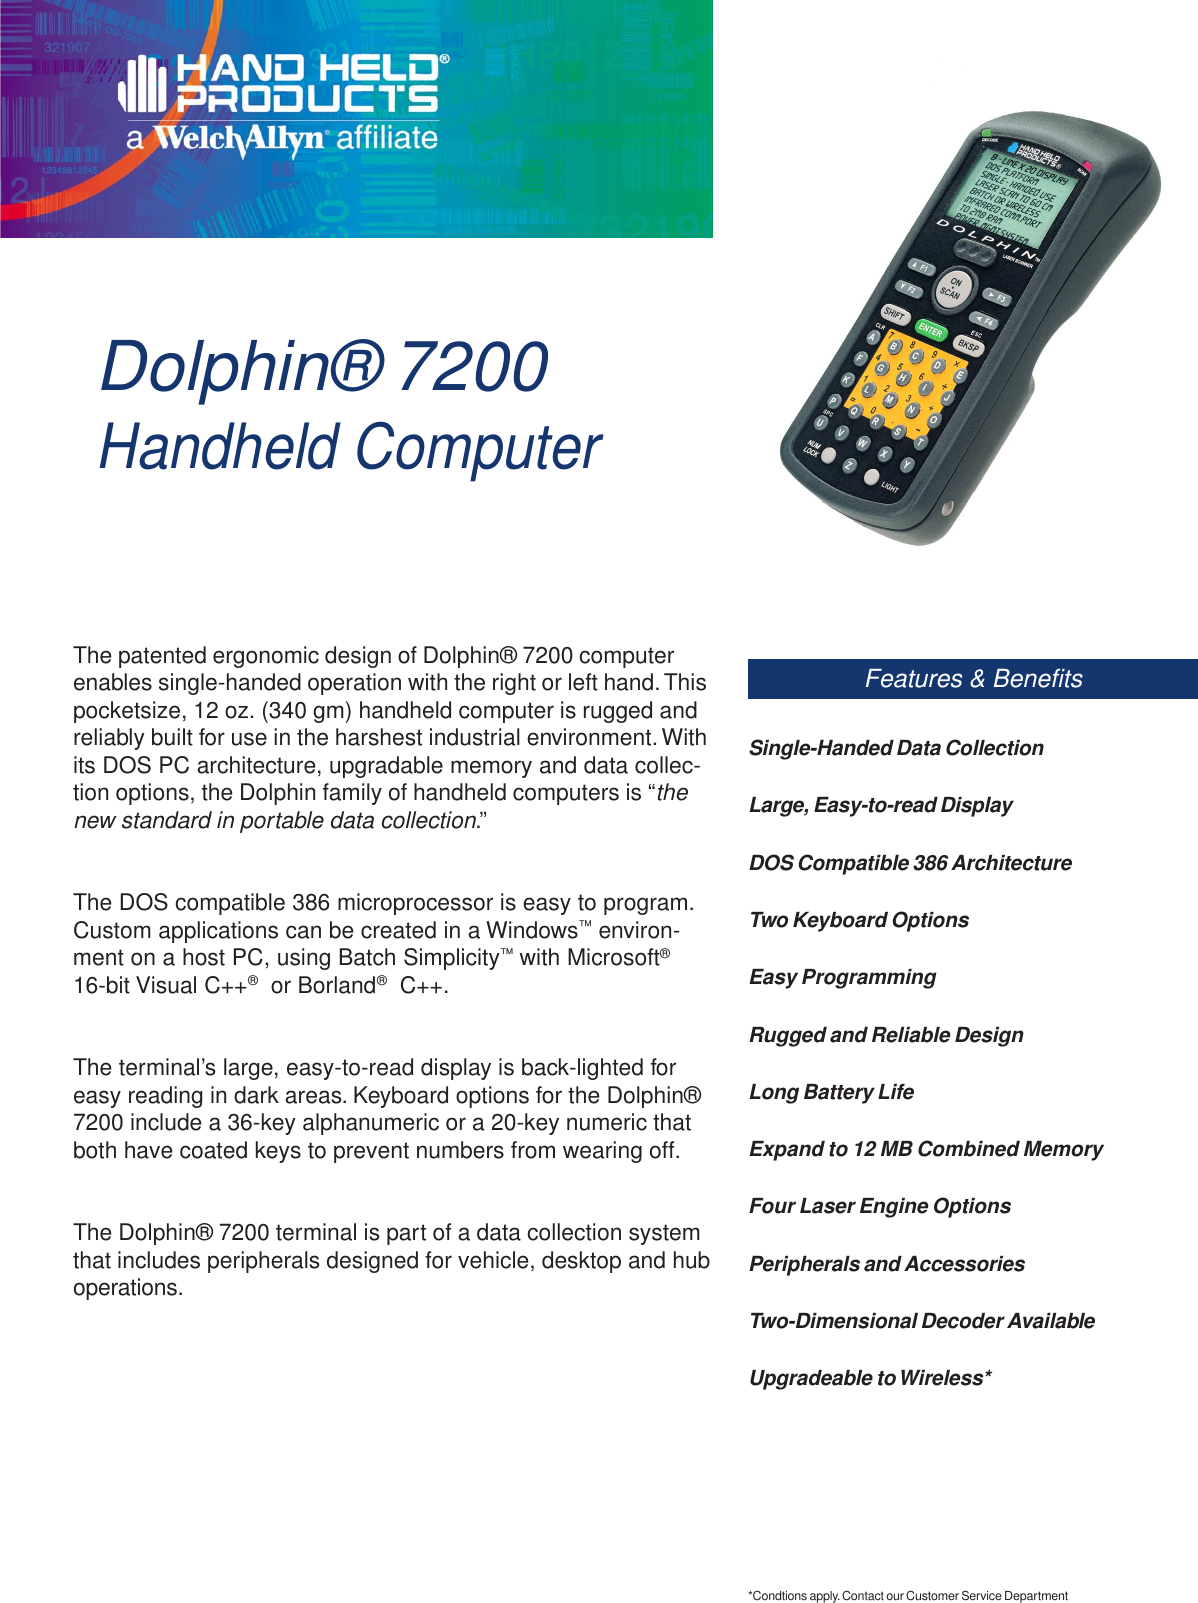 Dolphin® 7200Handheld ComputerFeatures &amp; BenefitsThe patented ergonomic design of Dolphin® 7200 computerenables single-handed operation with the right or left hand. Thispocketsize, 12 oz. (340 gm) handheld computer is rugged andreliably built for use in the harshest industrial environment. Withits DOS PC architecture, upgradable memory and data collec-tion options, the Dolphin family of handheld computers is “thenew standard in portable data collection.”The DOS compatible 386 microprocessor is easy to program.Custom applications can be created in a Windows™ environ-ment on a host PC, using Batch Simplicity™ with Microsoft®16-bit Visual C++®  or Borland®  C++.The terminal’s large, easy-to-read display is back-lighted foreasy reading in dark areas. Keyboard options for the Dolphin®7200 include a 36-key alphanumeric or a 20-key numeric thatboth have coated keys to prevent numbers from wearing off.The Dolphin® 7200 terminal is part of a data collection systemthat includes peripherals designed for vehicle, desktop and huboperations.Single-Handed Data CollectionLarge, Easy-to-read DisplayDOS Compatible 386 ArchitectureTwo Keyboard OptionsEasy ProgrammingRugged and Reliable DesignLong Battery LifeExpand to 12 MB Combined MemoryFour Laser Engine OptionsPeripherals and AccessoriesTwo-Dimensional Decoder AvailableUpgradeable to Wireless**Condtions apply. Contact our Customer Service Department